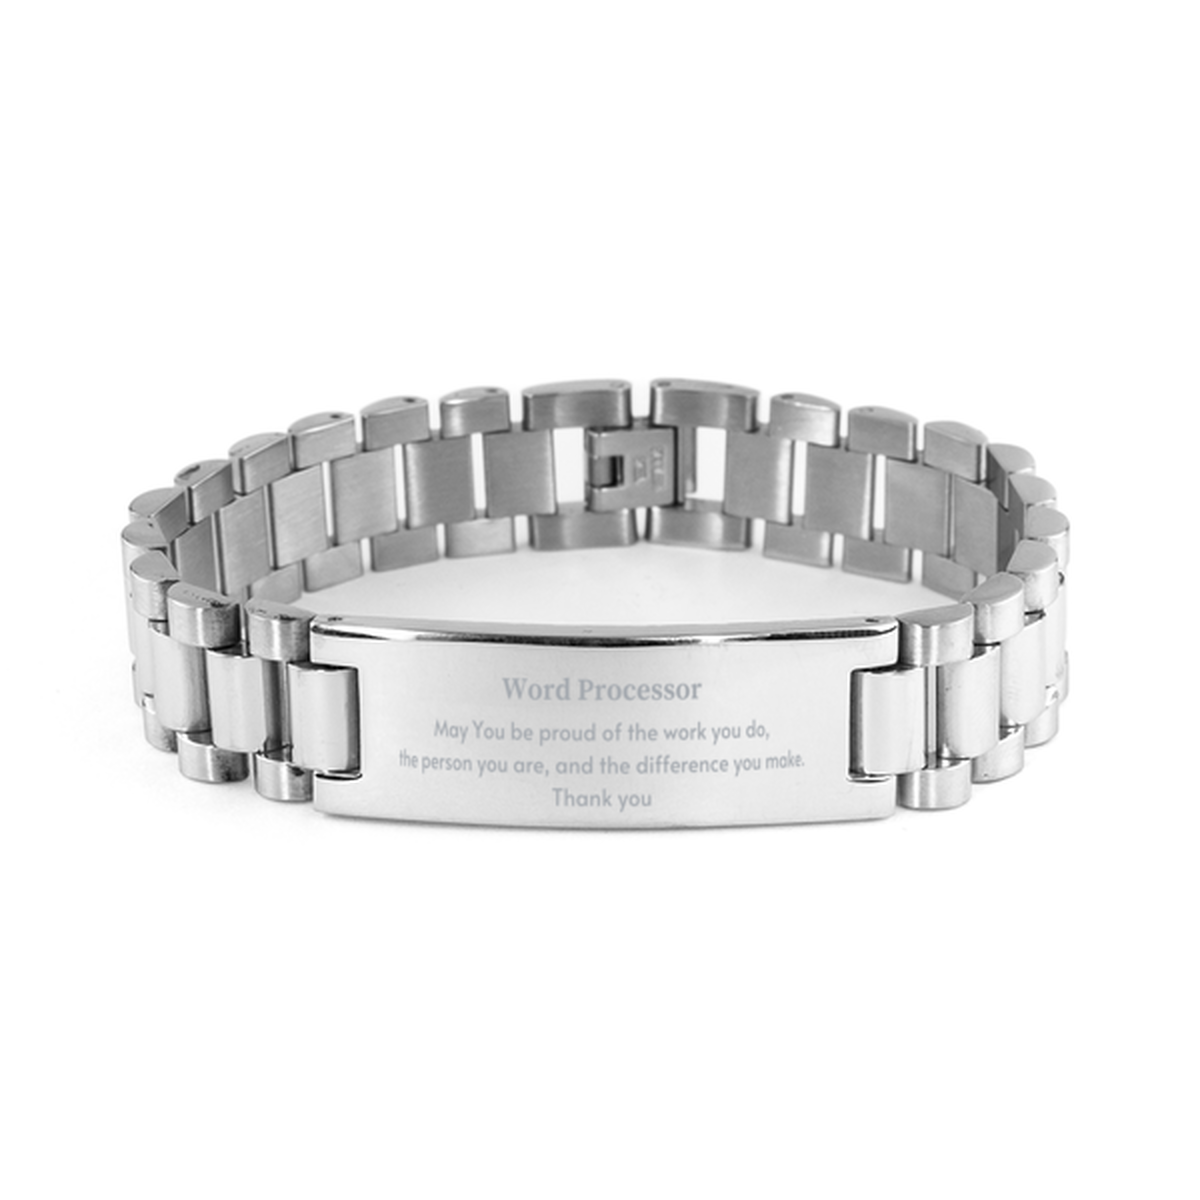 Heartwarming Ladder Stainless Steel Bracelet Retirement Coworkers Gifts for Word Processor, Word Processor May You be proud of the work you do, the person you are Gifts for Boss Men Women Friends